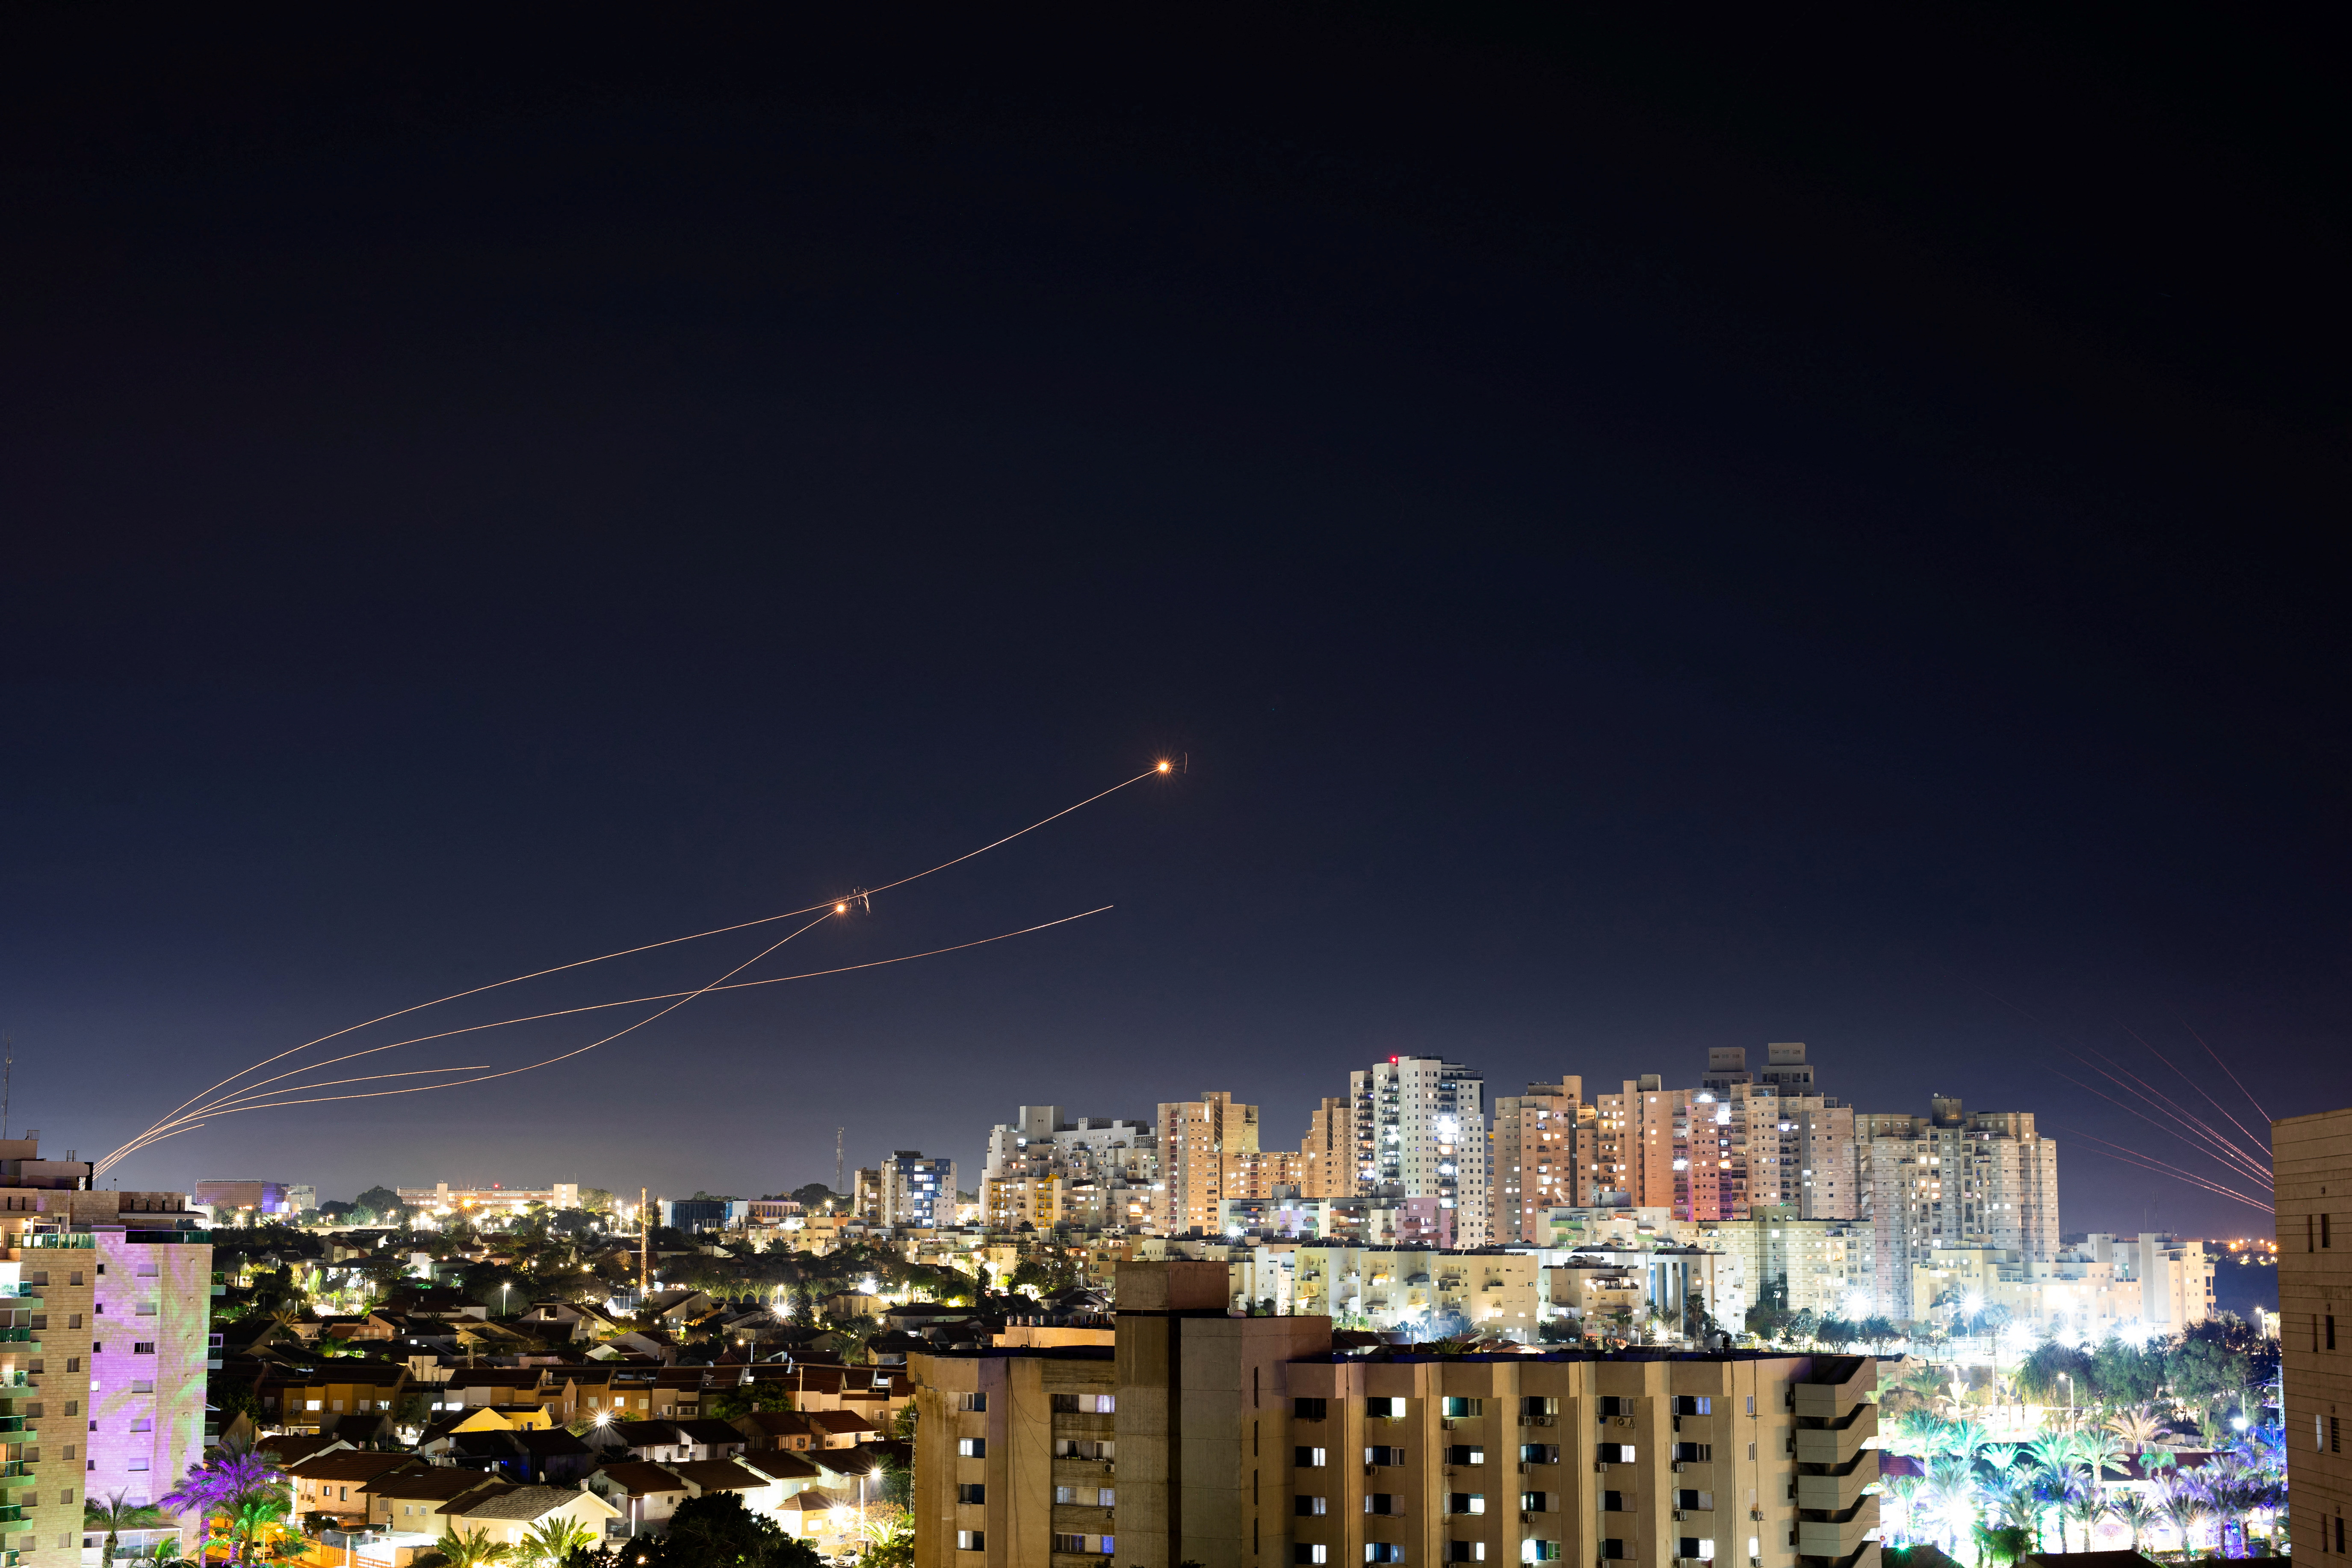 Israel's Iron Dome anti-missile system intercepts rockets fired by Hamas from Gaza. /Amir Cohen/Reuters